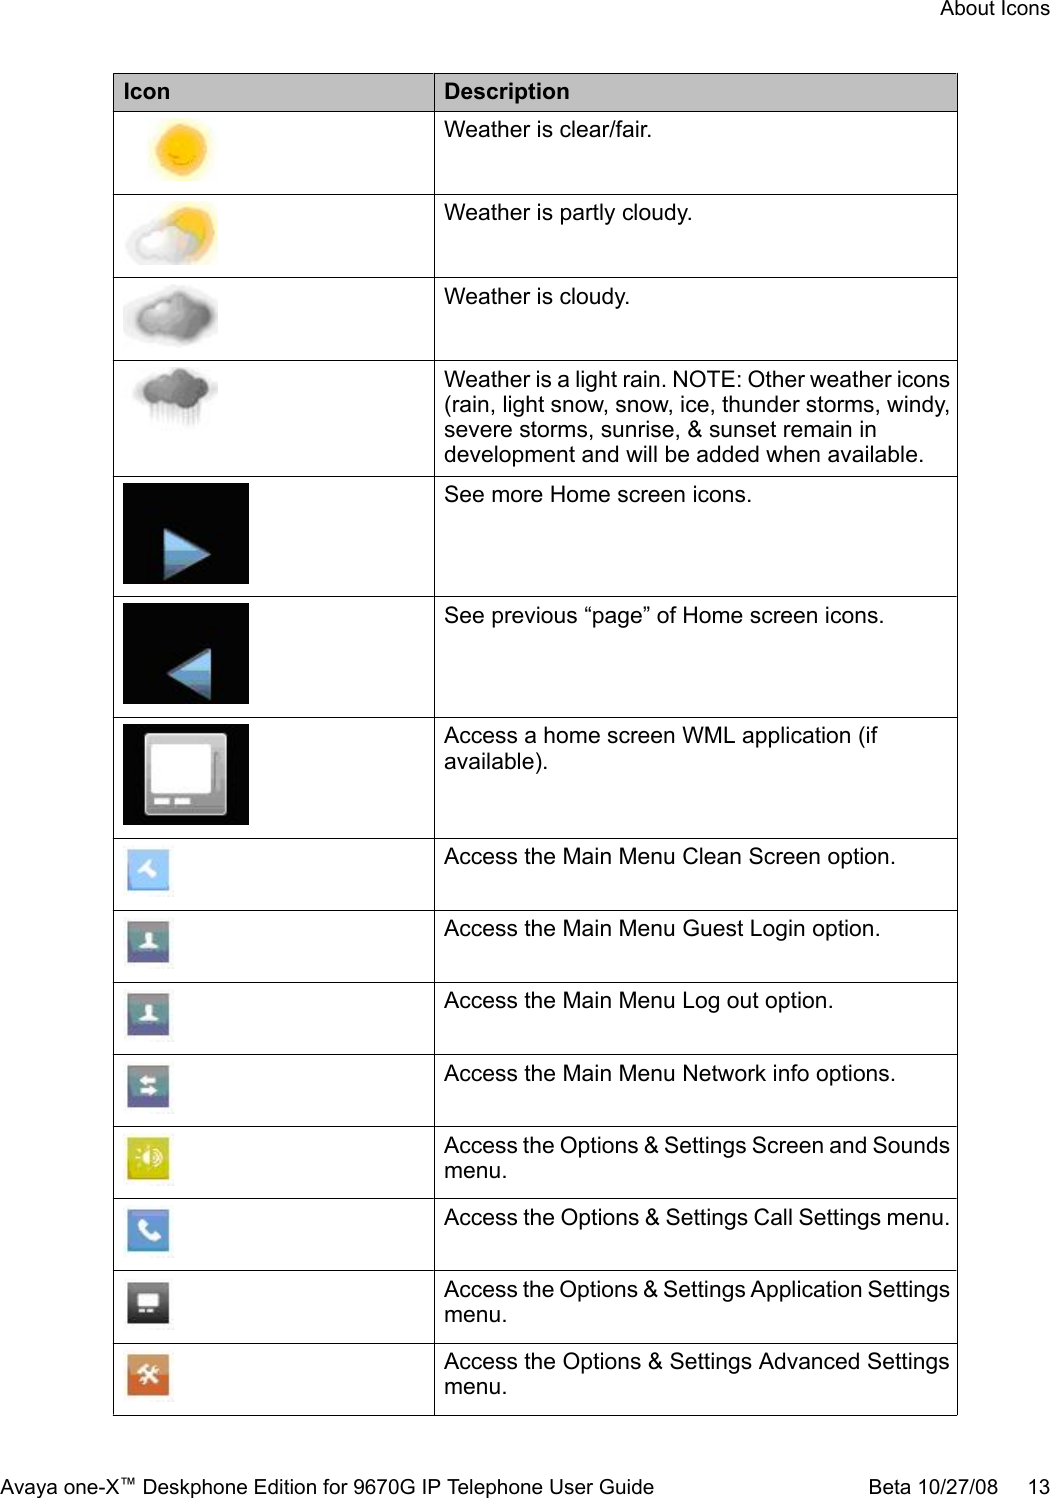 Icon DescriptionWeather is clear/fair.Weather is partly cloudy.Weather is cloudy.Weather is a light rain. NOTE: Other weather icons(rain, light snow, snow, ice, thunder storms, windy,severe storms, sunrise, &amp; sunset remain indevelopment and will be added when available.See more Home screen icons.See previous “page” of Home screen icons.Access a home screen WML application (ifavailable).Access the Main Menu Clean Screen option.Access the Main Menu Guest Login option.Access the Main Menu Log out option.Access the Main Menu Network info options.Access the Options &amp; Settings Screen and Soundsmenu.Access the Options &amp; Settings Call Settings menu.Access the Options &amp; Settings Application Settingsmenu.Access the Options &amp; Settings Advanced Settingsmenu.About IconsAvaya one-X™ Deskphone Edition for 9670G IP Telephone User Guide Beta 10/27/08     13